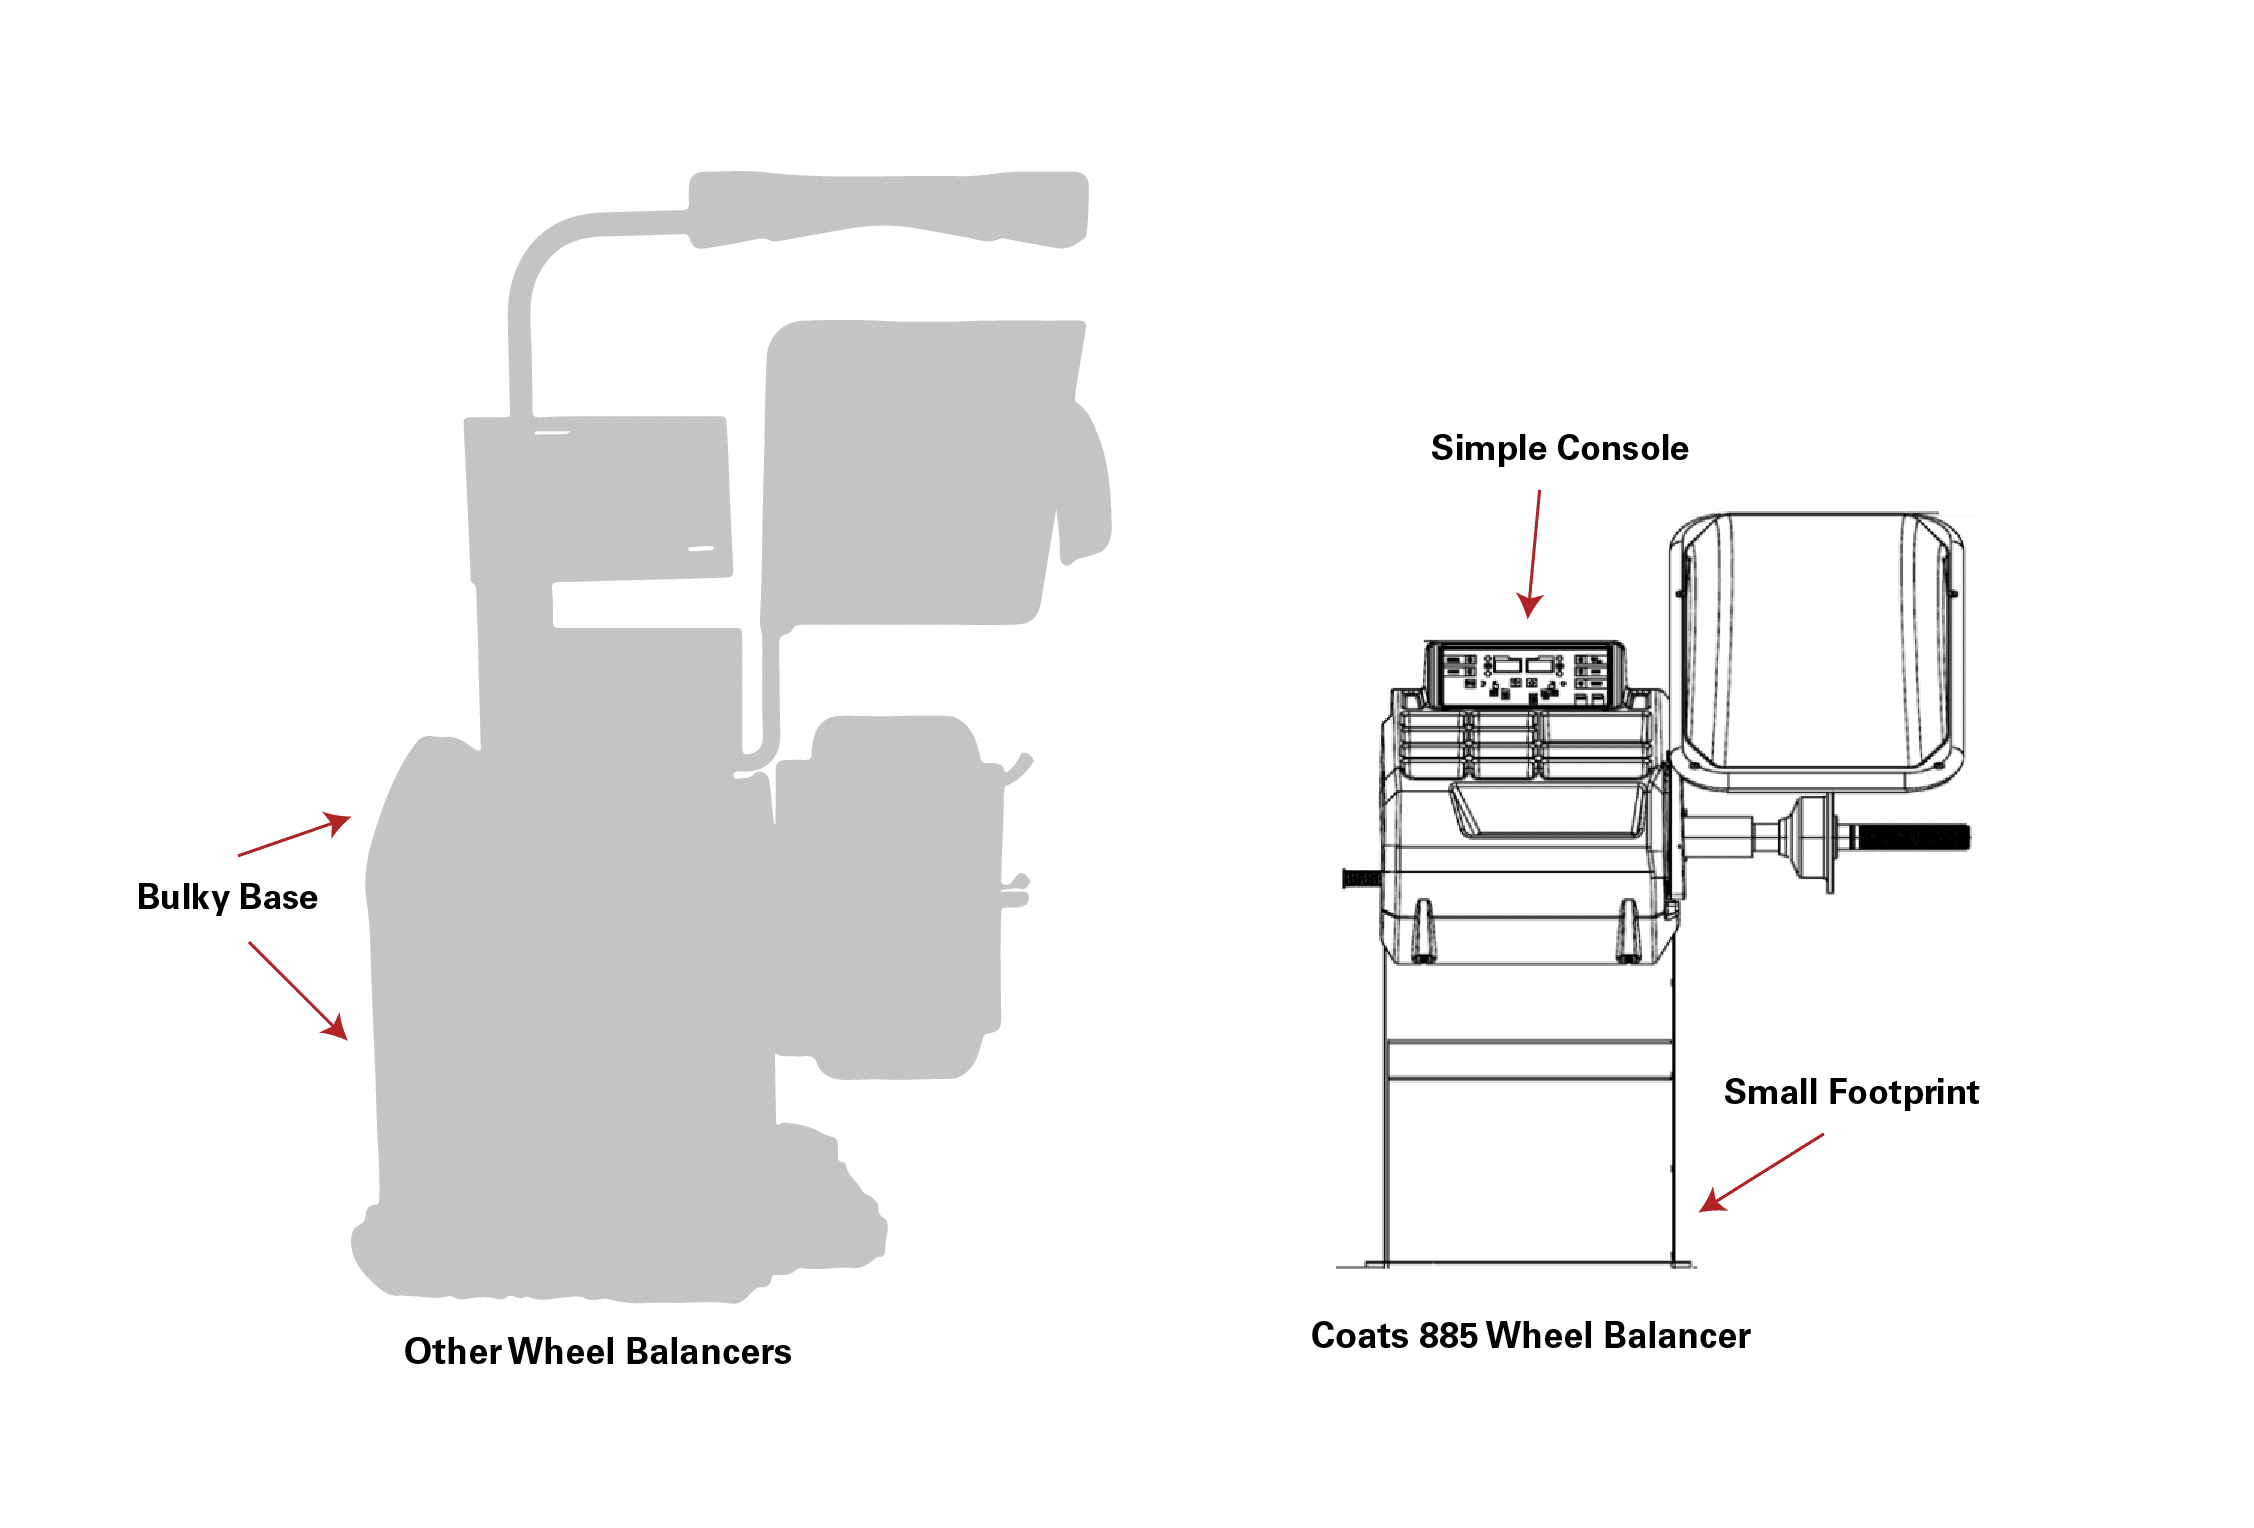 Comparison of wheel balancers with arrows to the bulky base on other wheel balancers, the Coats 885 shows it has a smaller footprint in comparison.